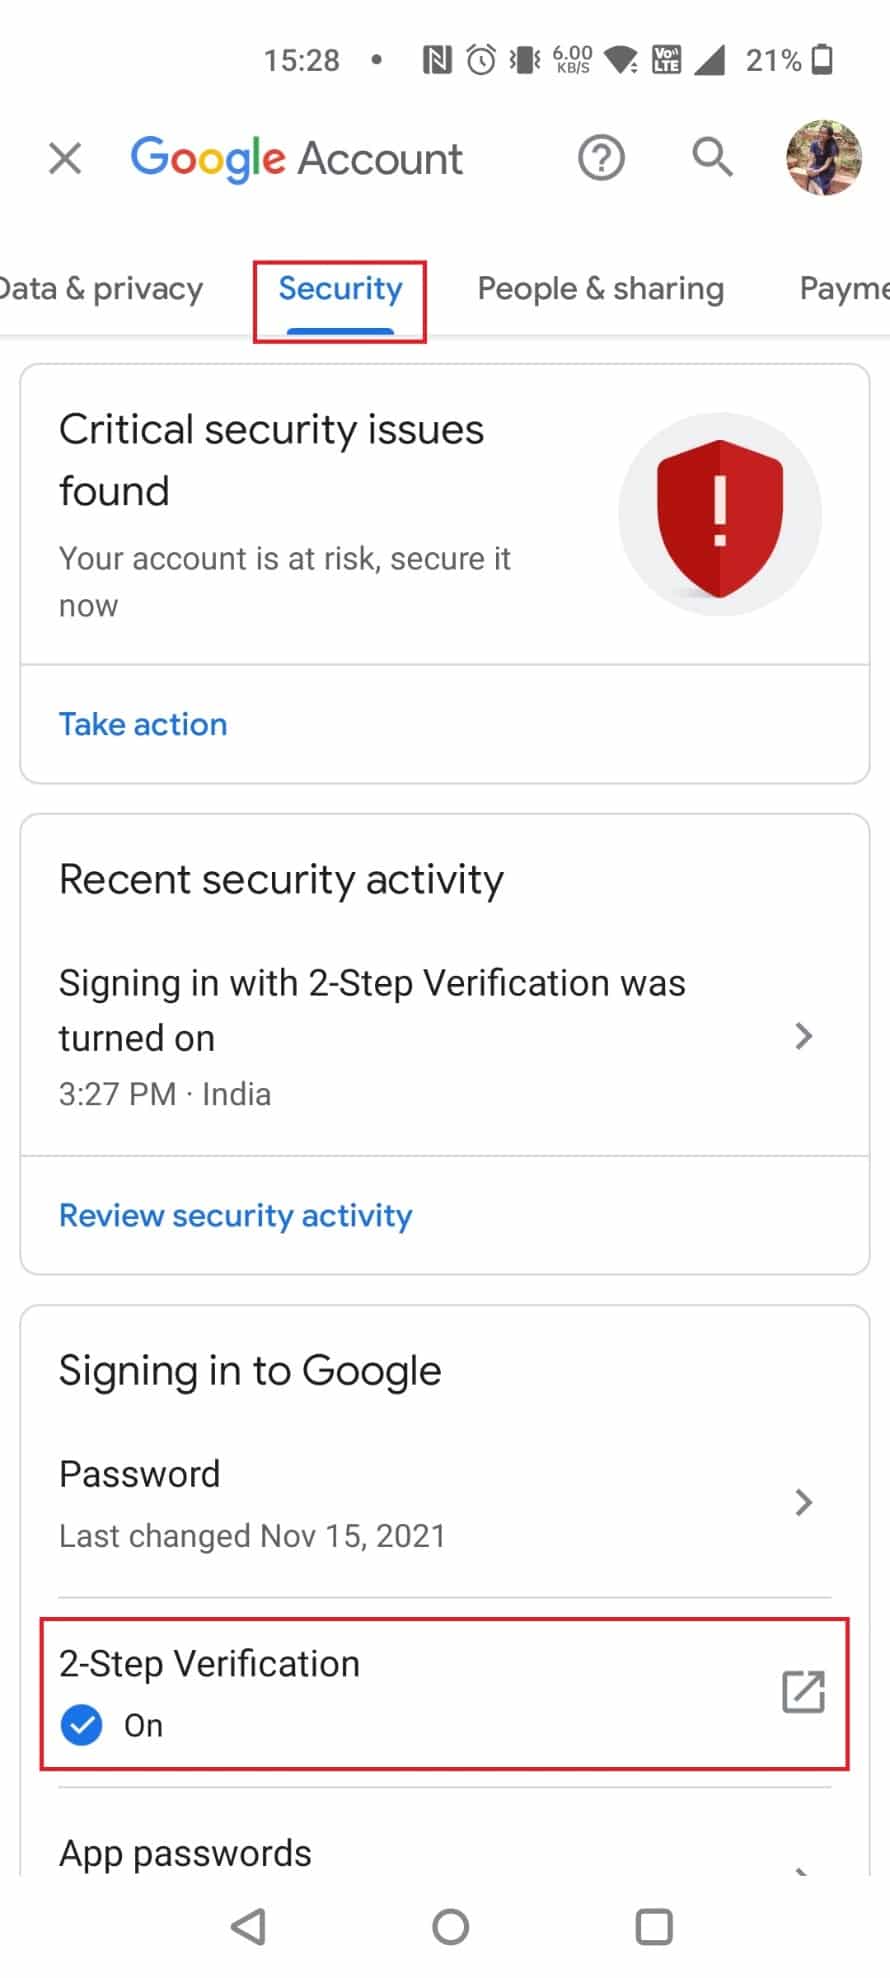 Tap on 2-Step Verification under Signing in to Google | What Happens If You Can’t Remember Gmail Password?